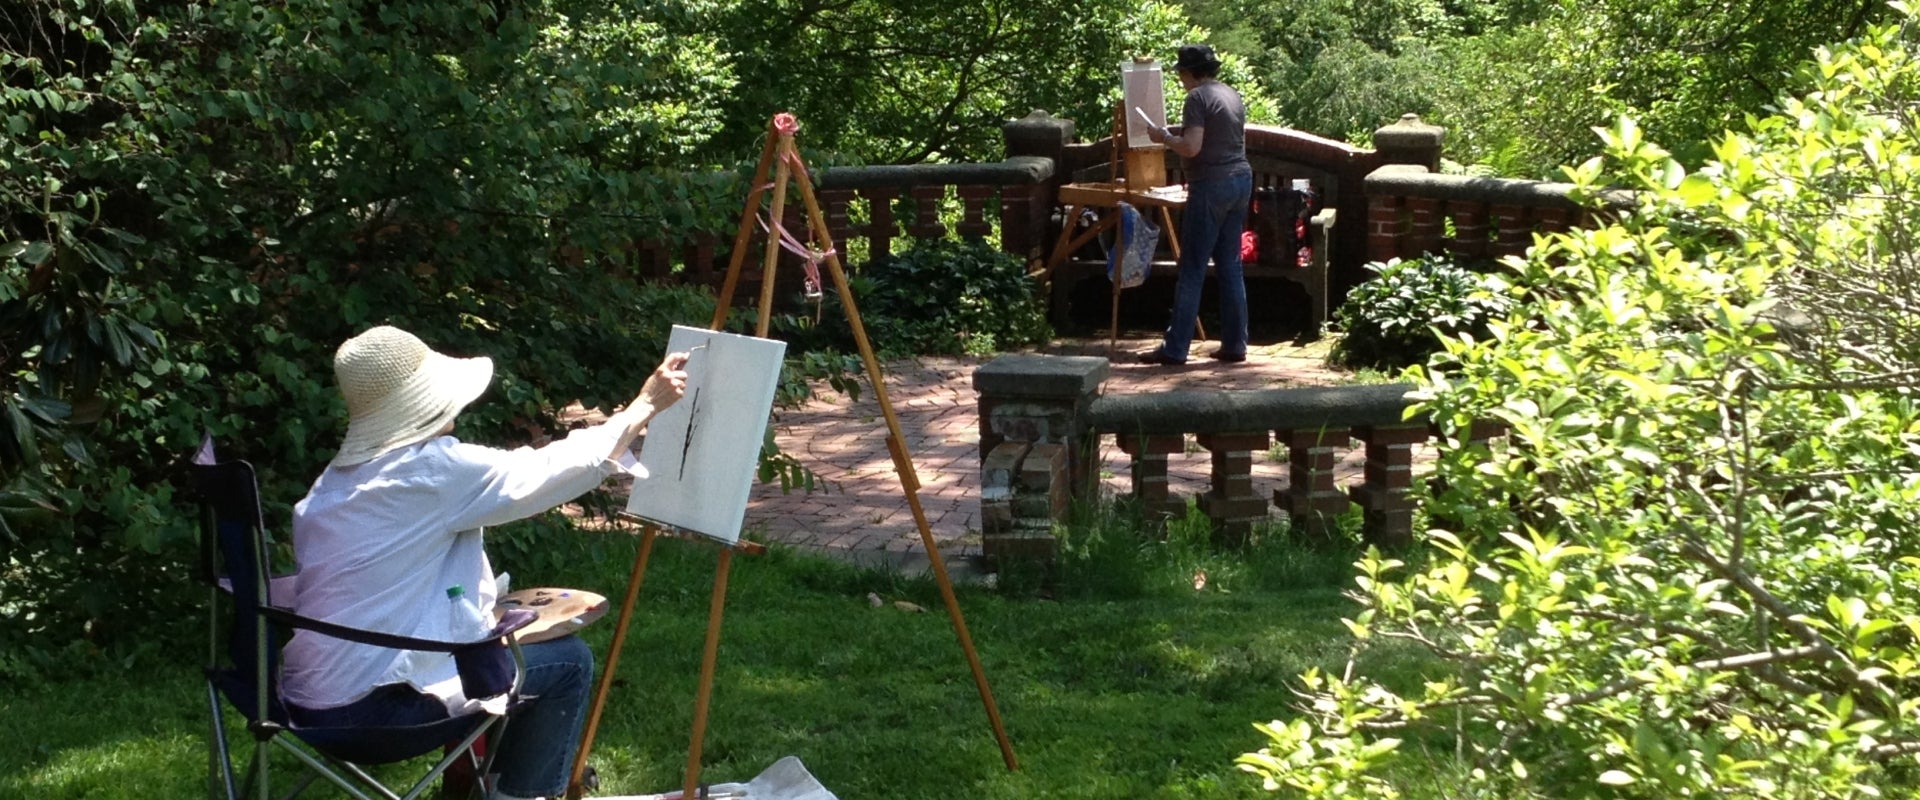 A person in a hat sits in a garden and paints at an easel. 